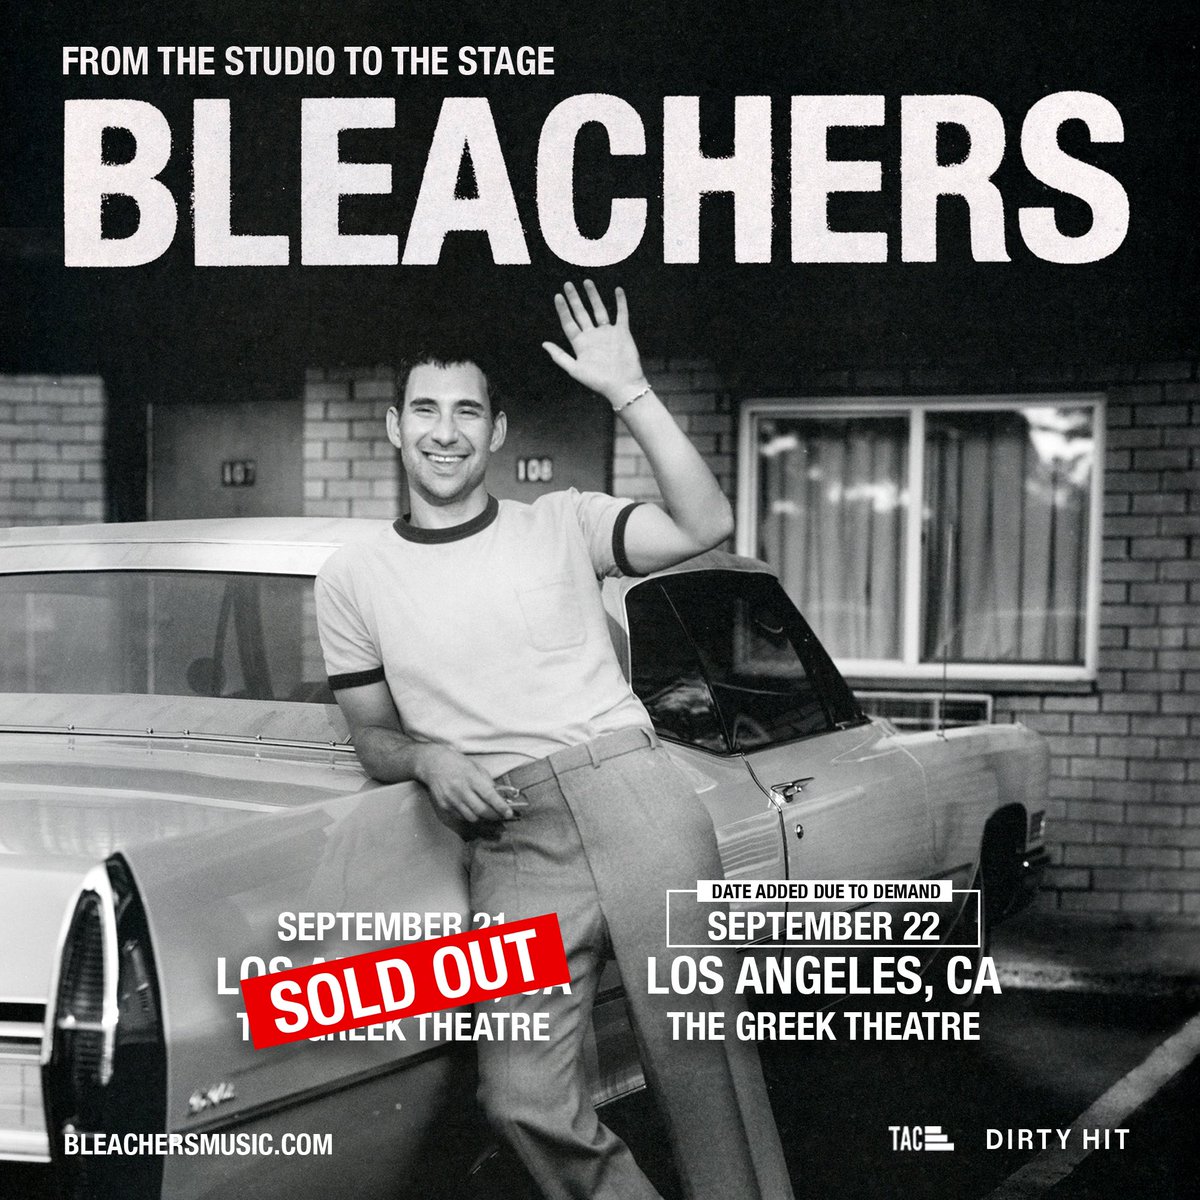 First night of the Bleachers is sold out. Second show added on 9.22. presale — tomorrow 5/9 at 10 am PT general onsale — friday 5/10 at 10 am PT event page: lagreektheatre.com/events/detail/… #bleachers #bleachersmusic #greektheatre #thingstodoinla #concerts @bleachersmusic